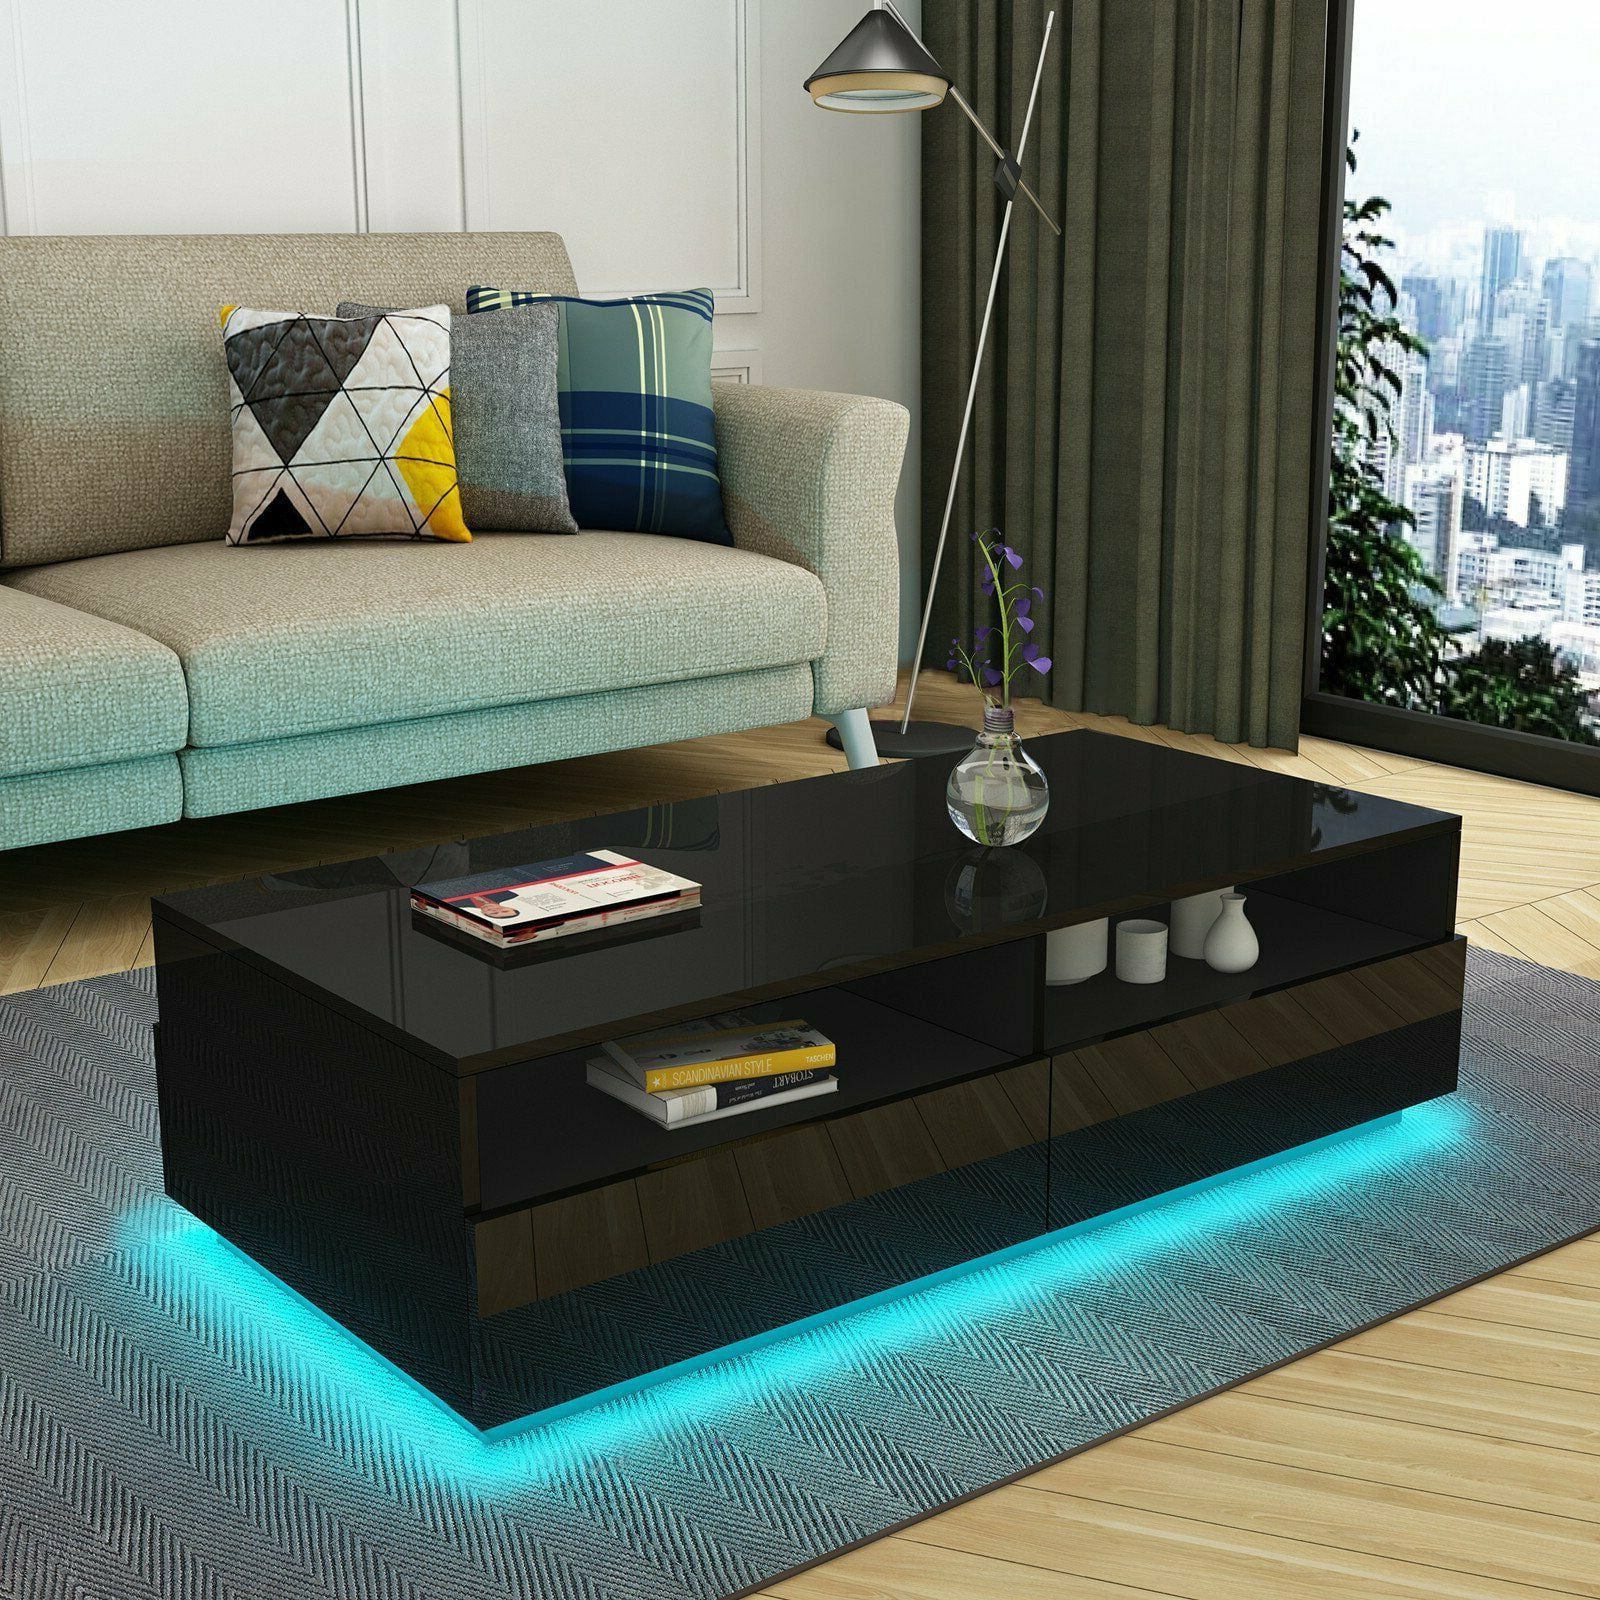 Led Rectangular Coffee Table Tea Modern Living Room Furniture Black Intended For Coffee Tables With Led Lights (View 14 of 20)